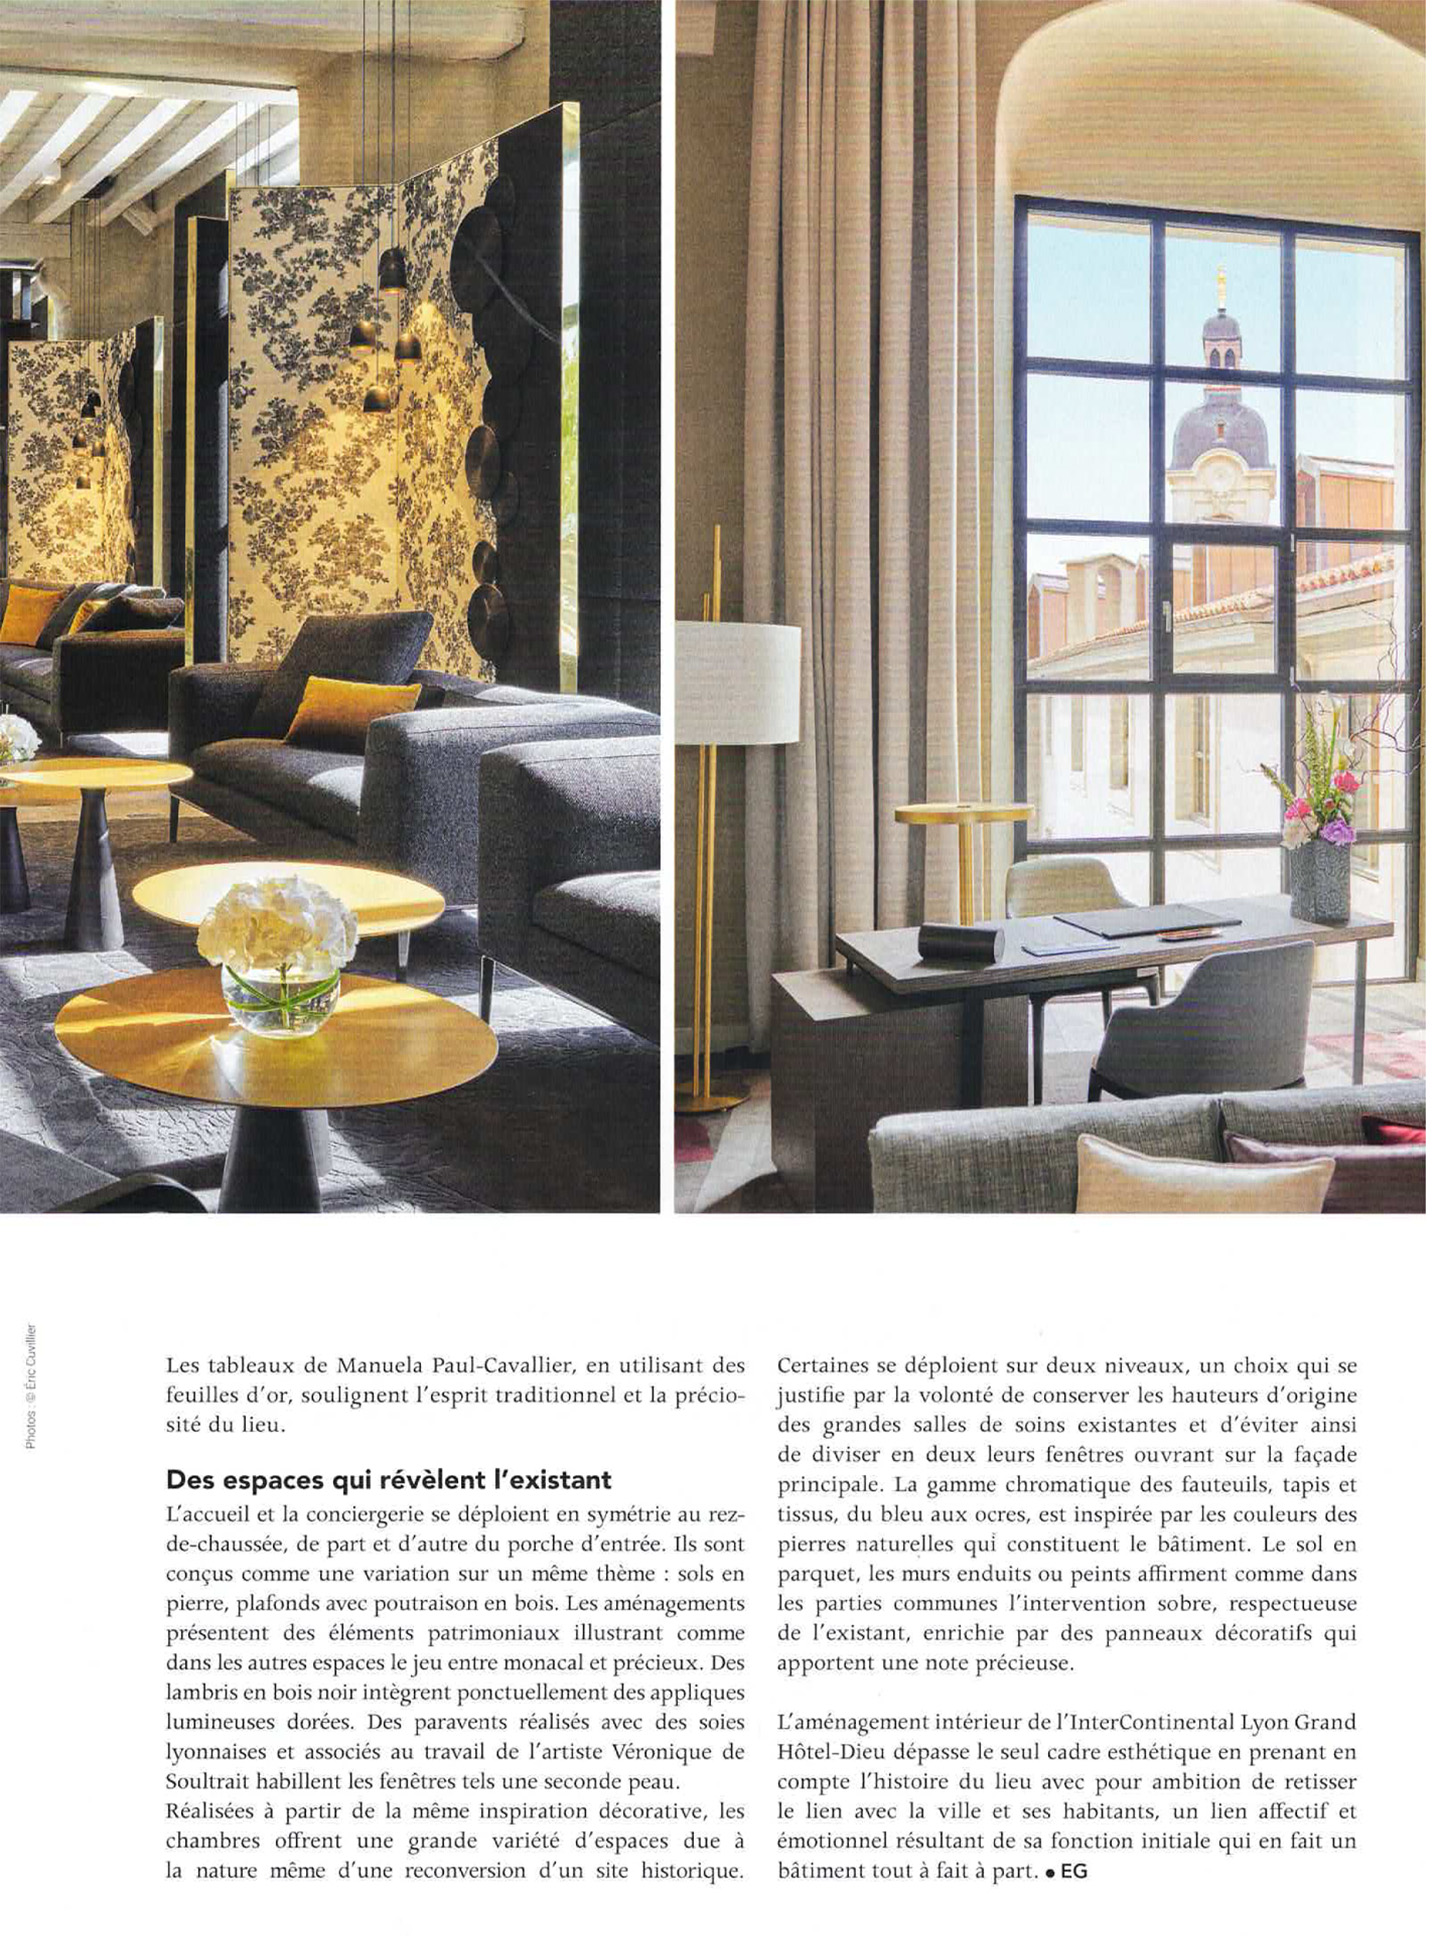 Article on the InterContinental Lyon Hotel Dieu realized by the studio jean-Philippe Nuel in the magazine In Interiors, new luxury hotel, luxury interior design, historical heritage